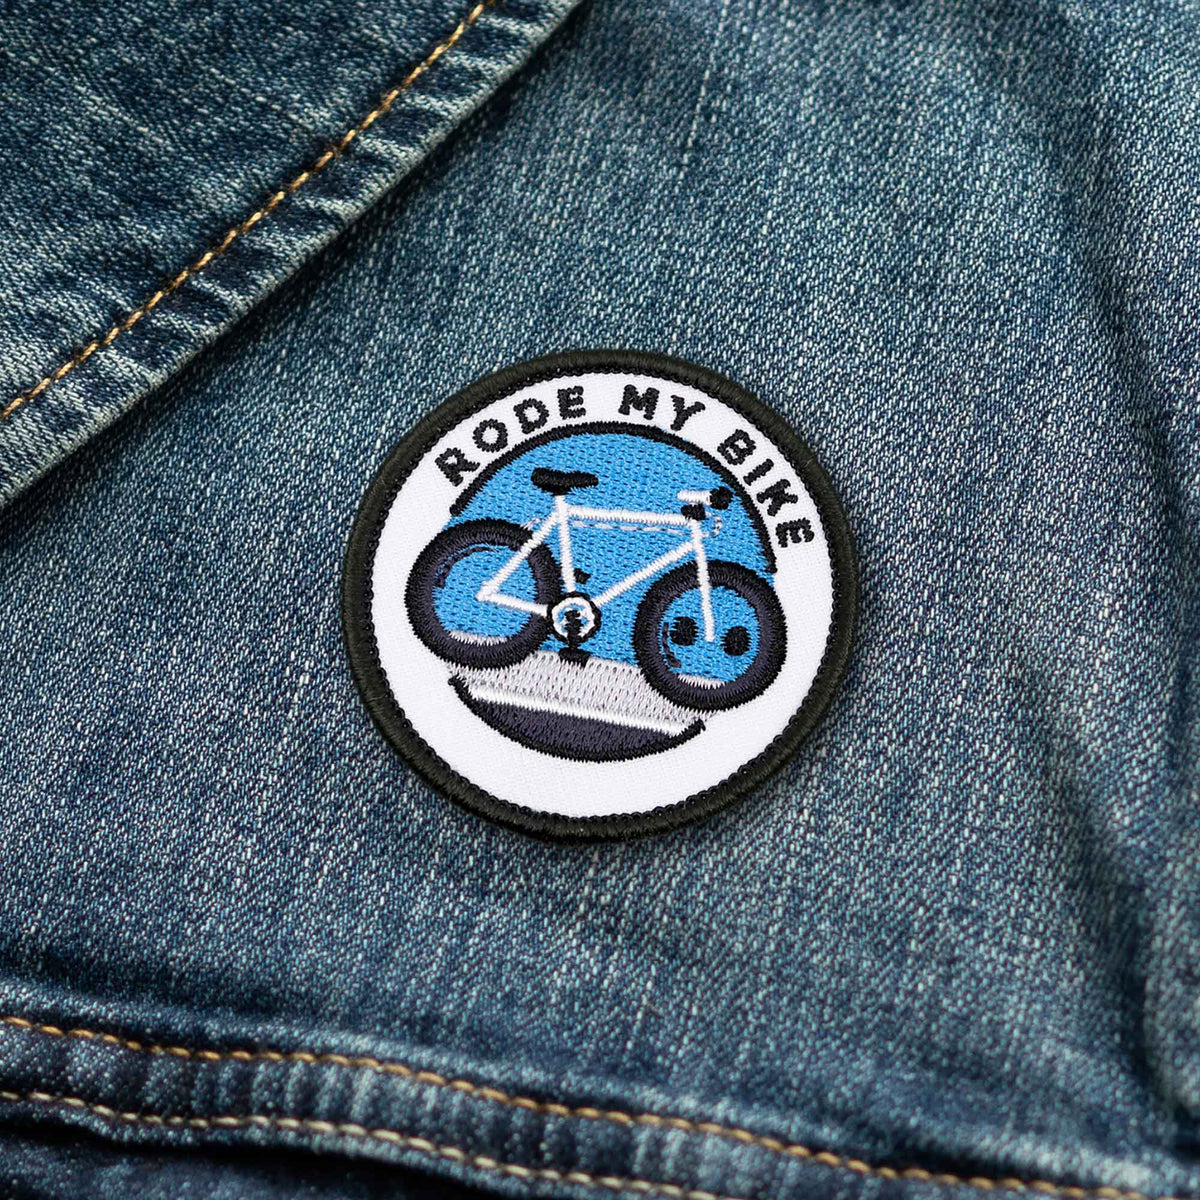 Rode My Bike adulting merit badge patch for adults on denim jacket